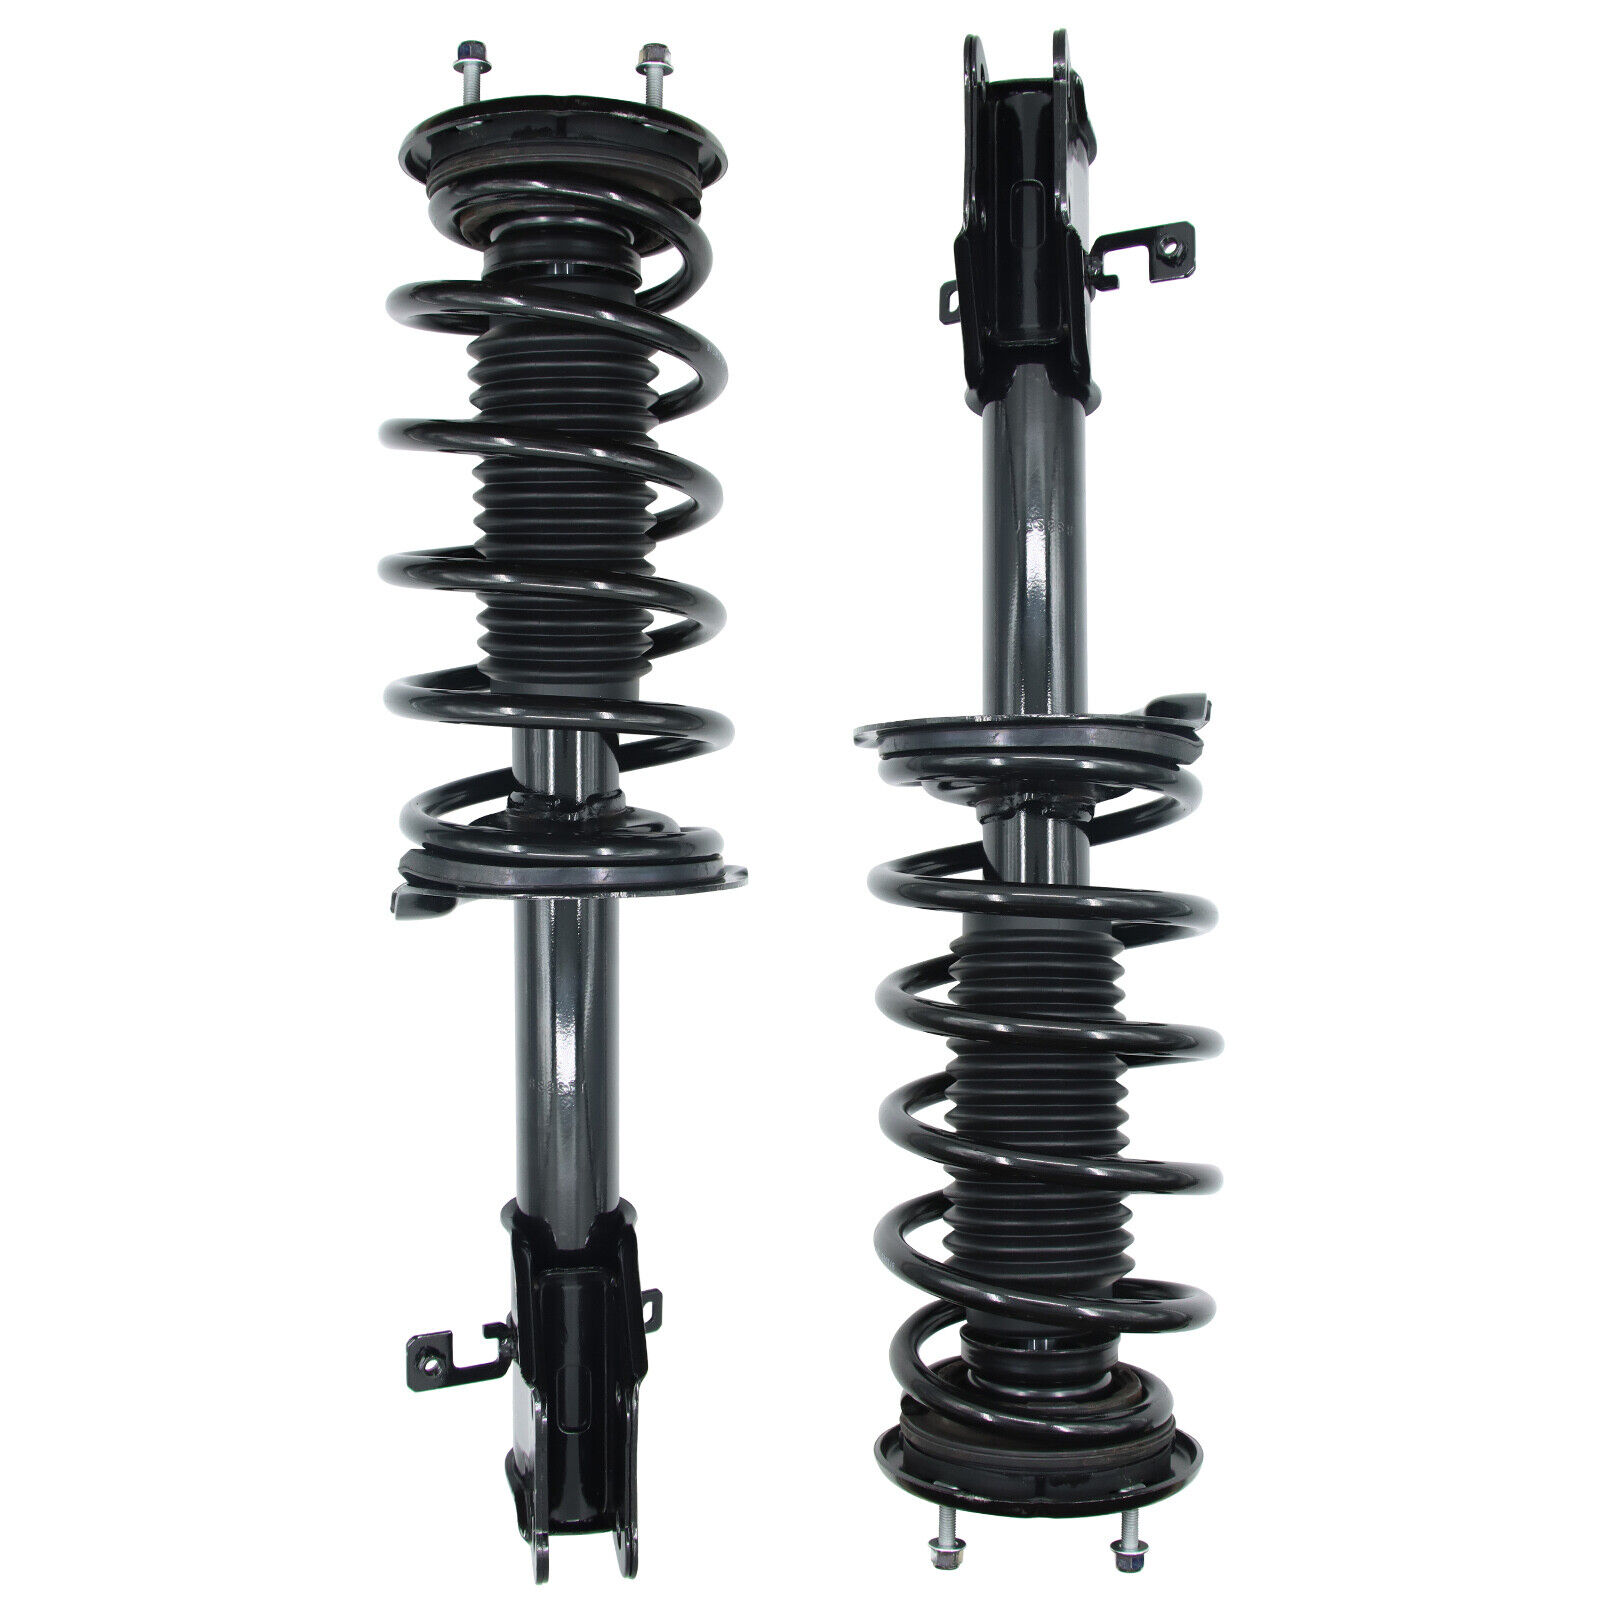 2PC Front Left/Right Shock Absorbers fits 2007-2010 Ford Edge Lincoln MKX